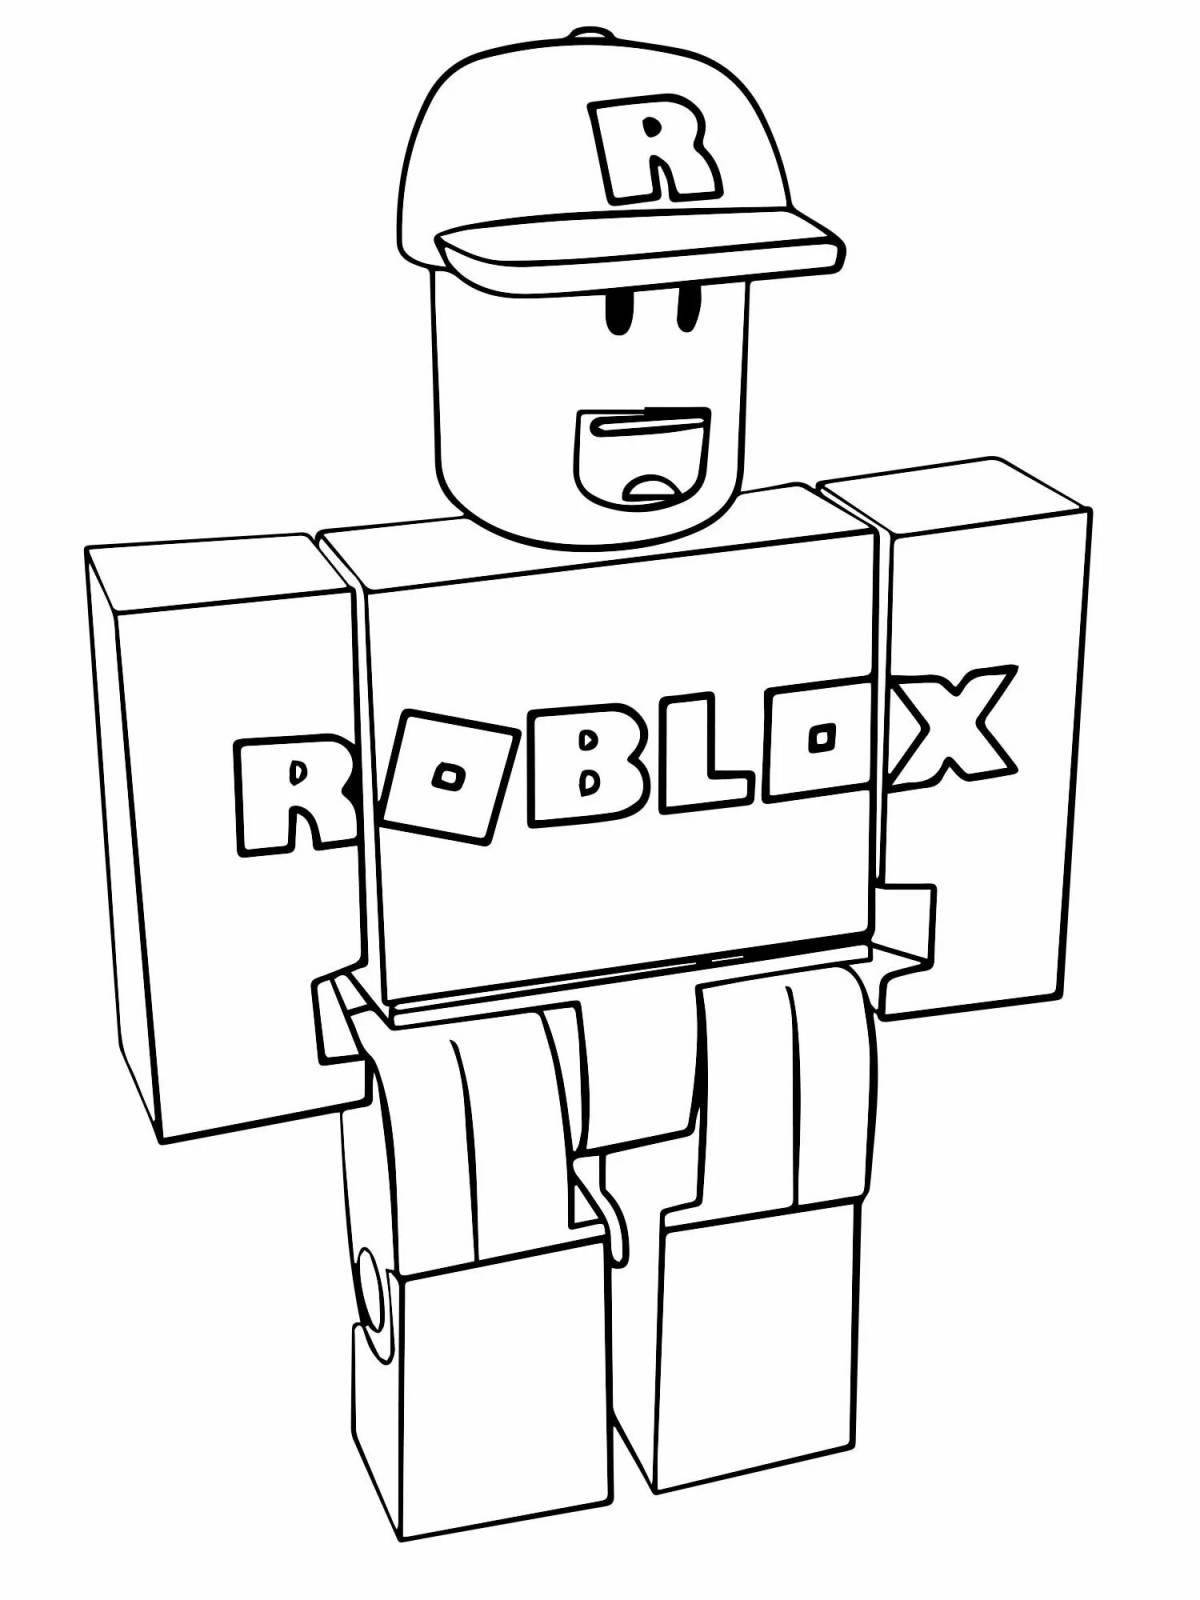 Roblox shining coloring page